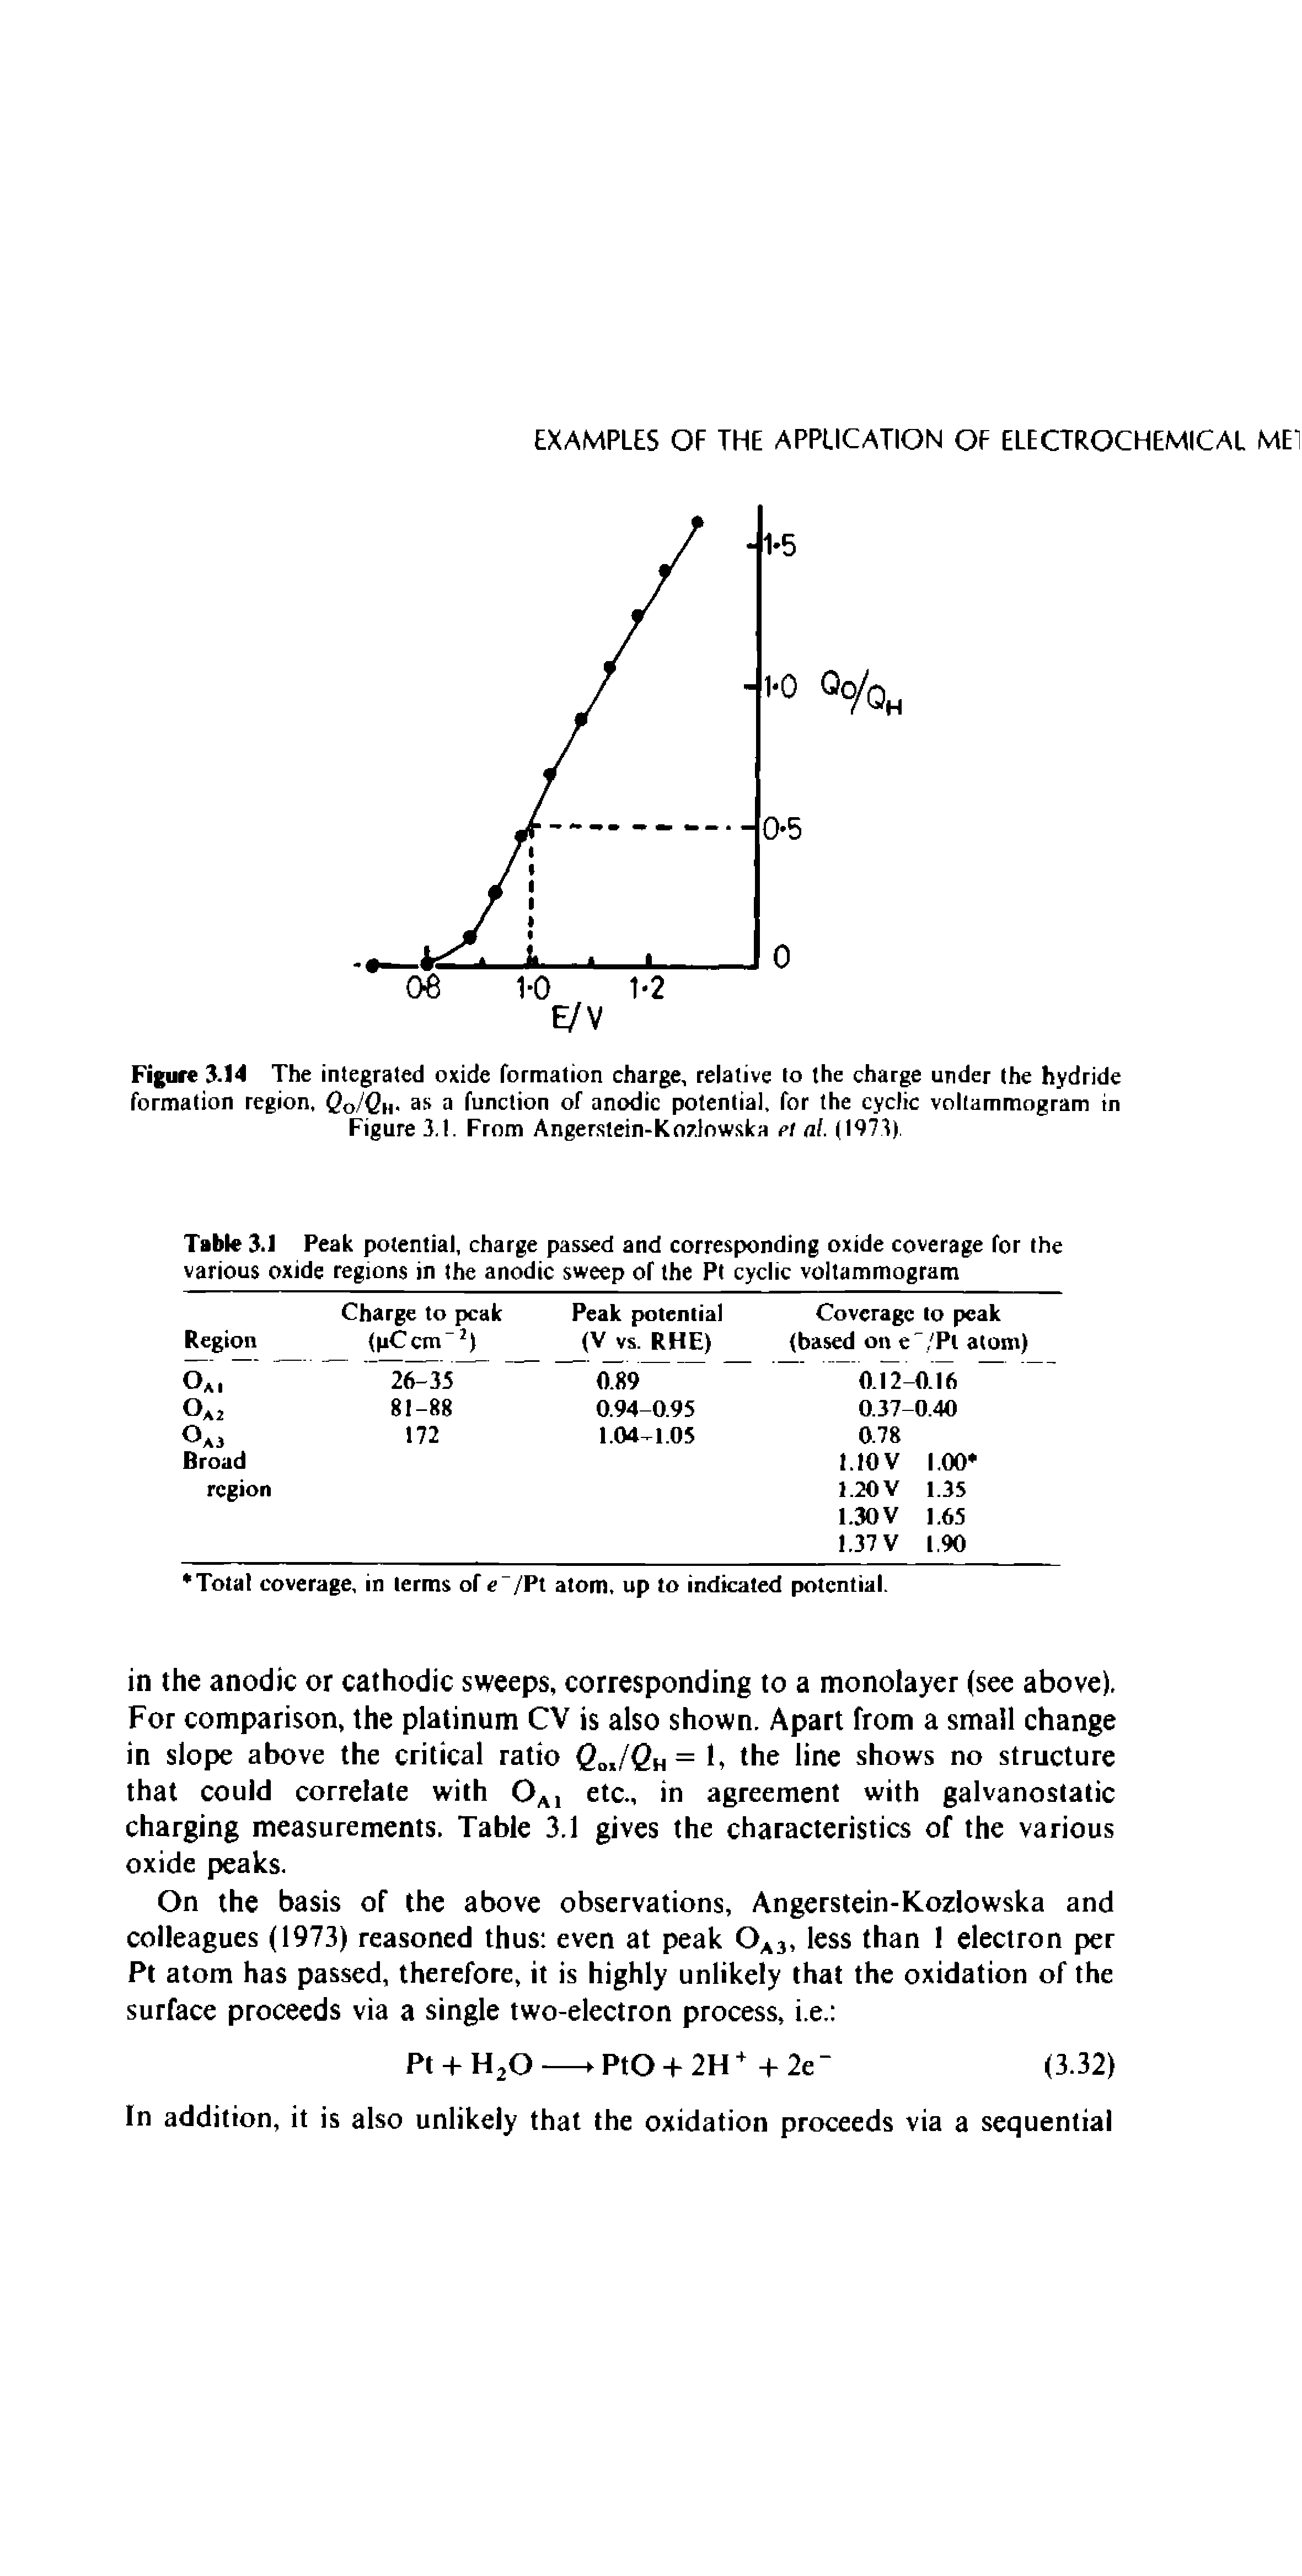 Figure 3.14 The integrated oxide formation charge, relative to the charge under the hydride formation region, ( o/Gh as a function of anodic potential, for the cyclic voltammogram in Figure 3.1. From Angerslein-Kozlnwska et ai (1973)...